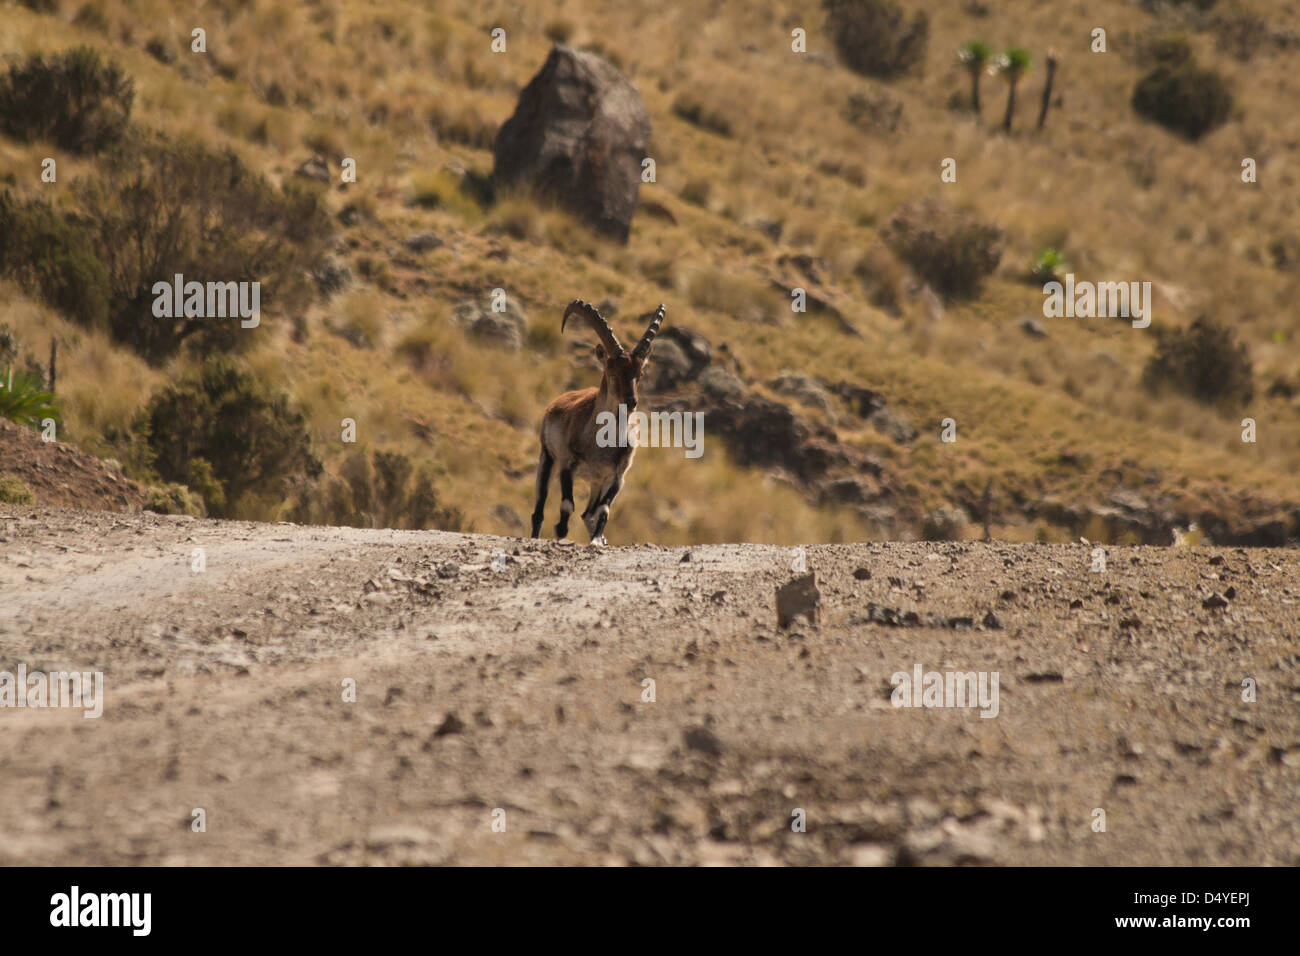 A male Walia Ibex runs across open terrain in the Simian Mountains National Park to reach an out of shot female Ibex Stock Photo